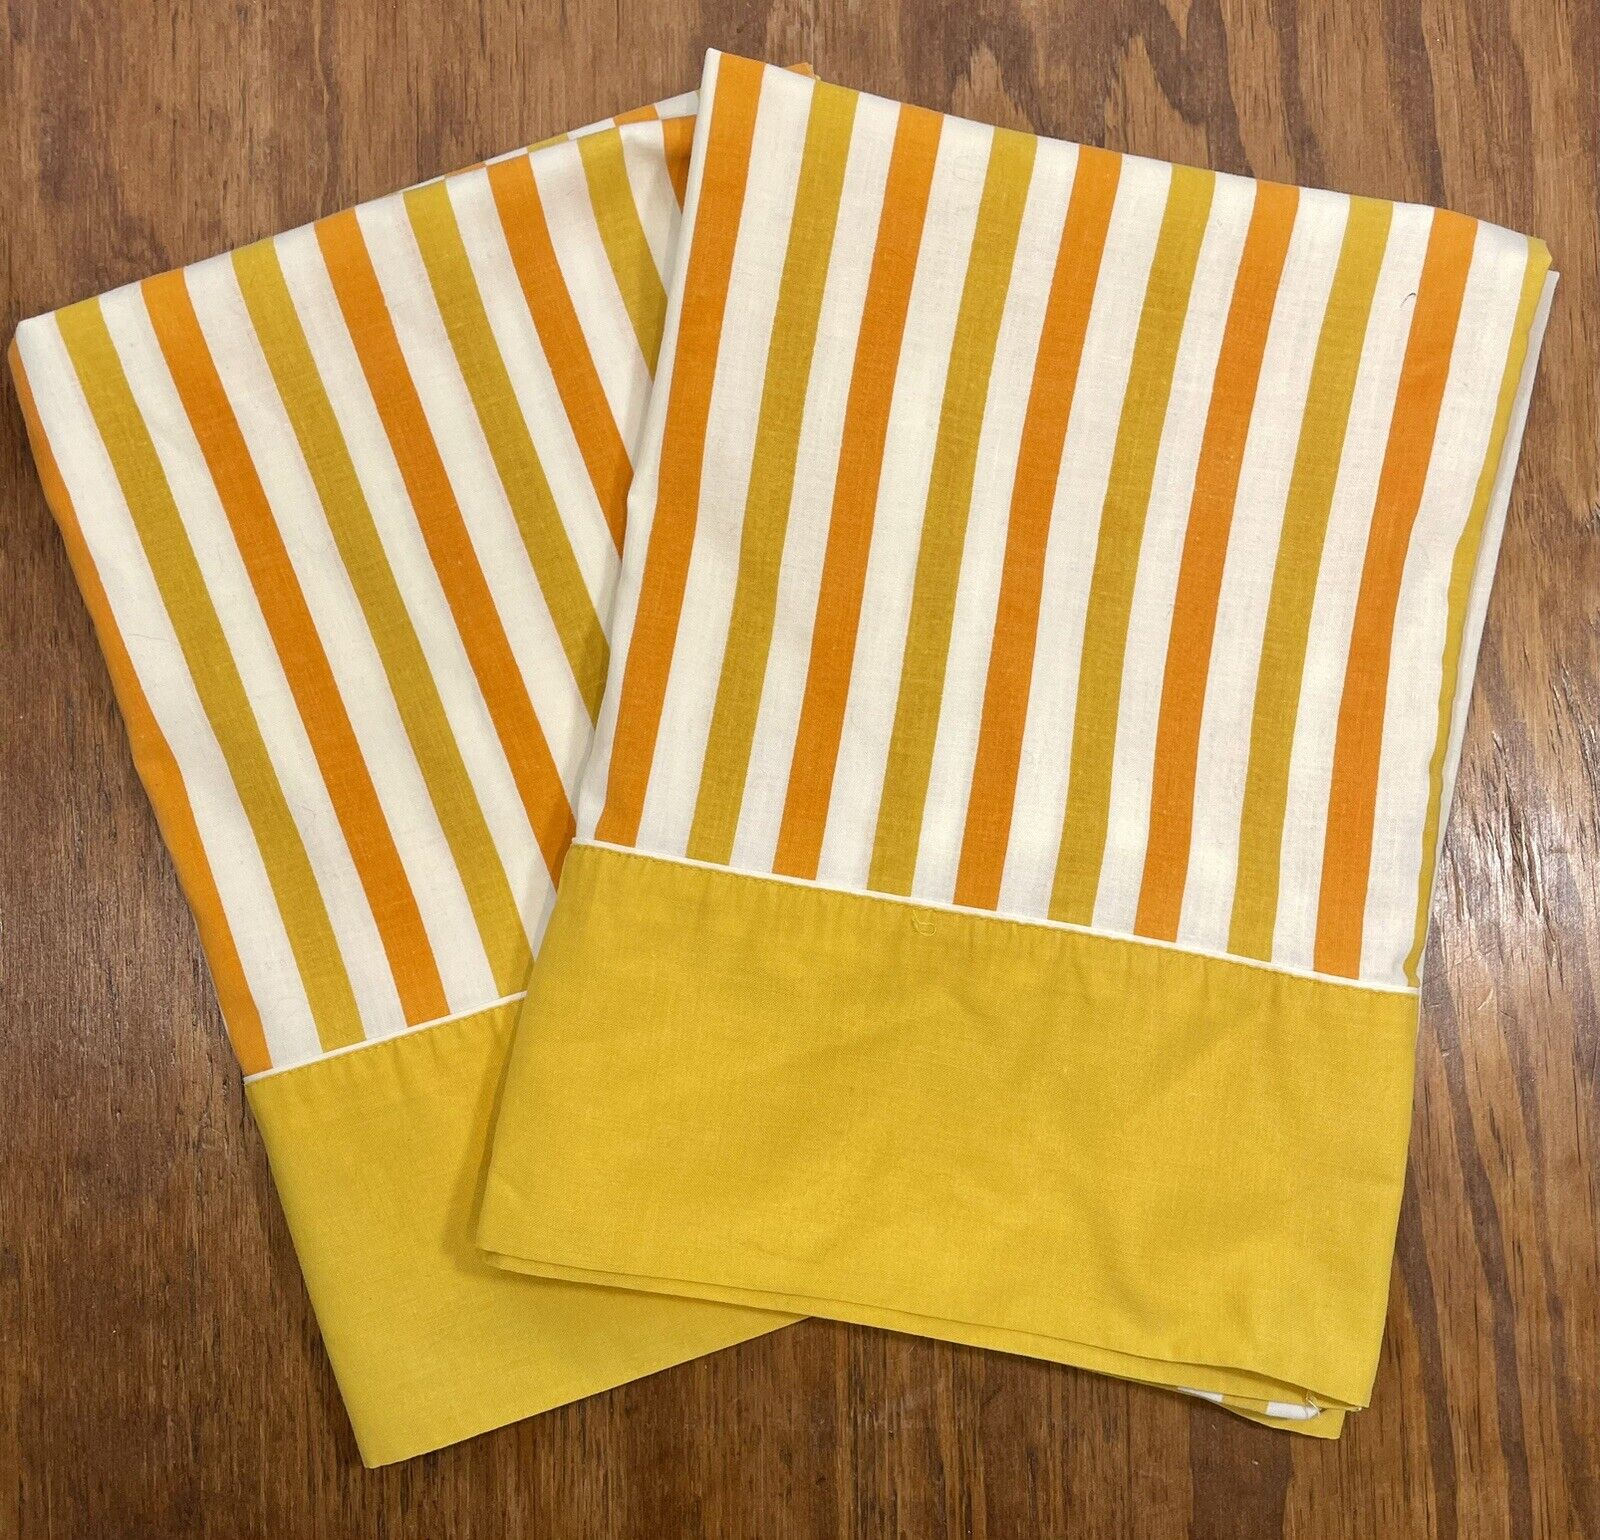 Vintage 1970s Pillowcases Striped Orange and Gold by Fashion Manor Retro Bedroom